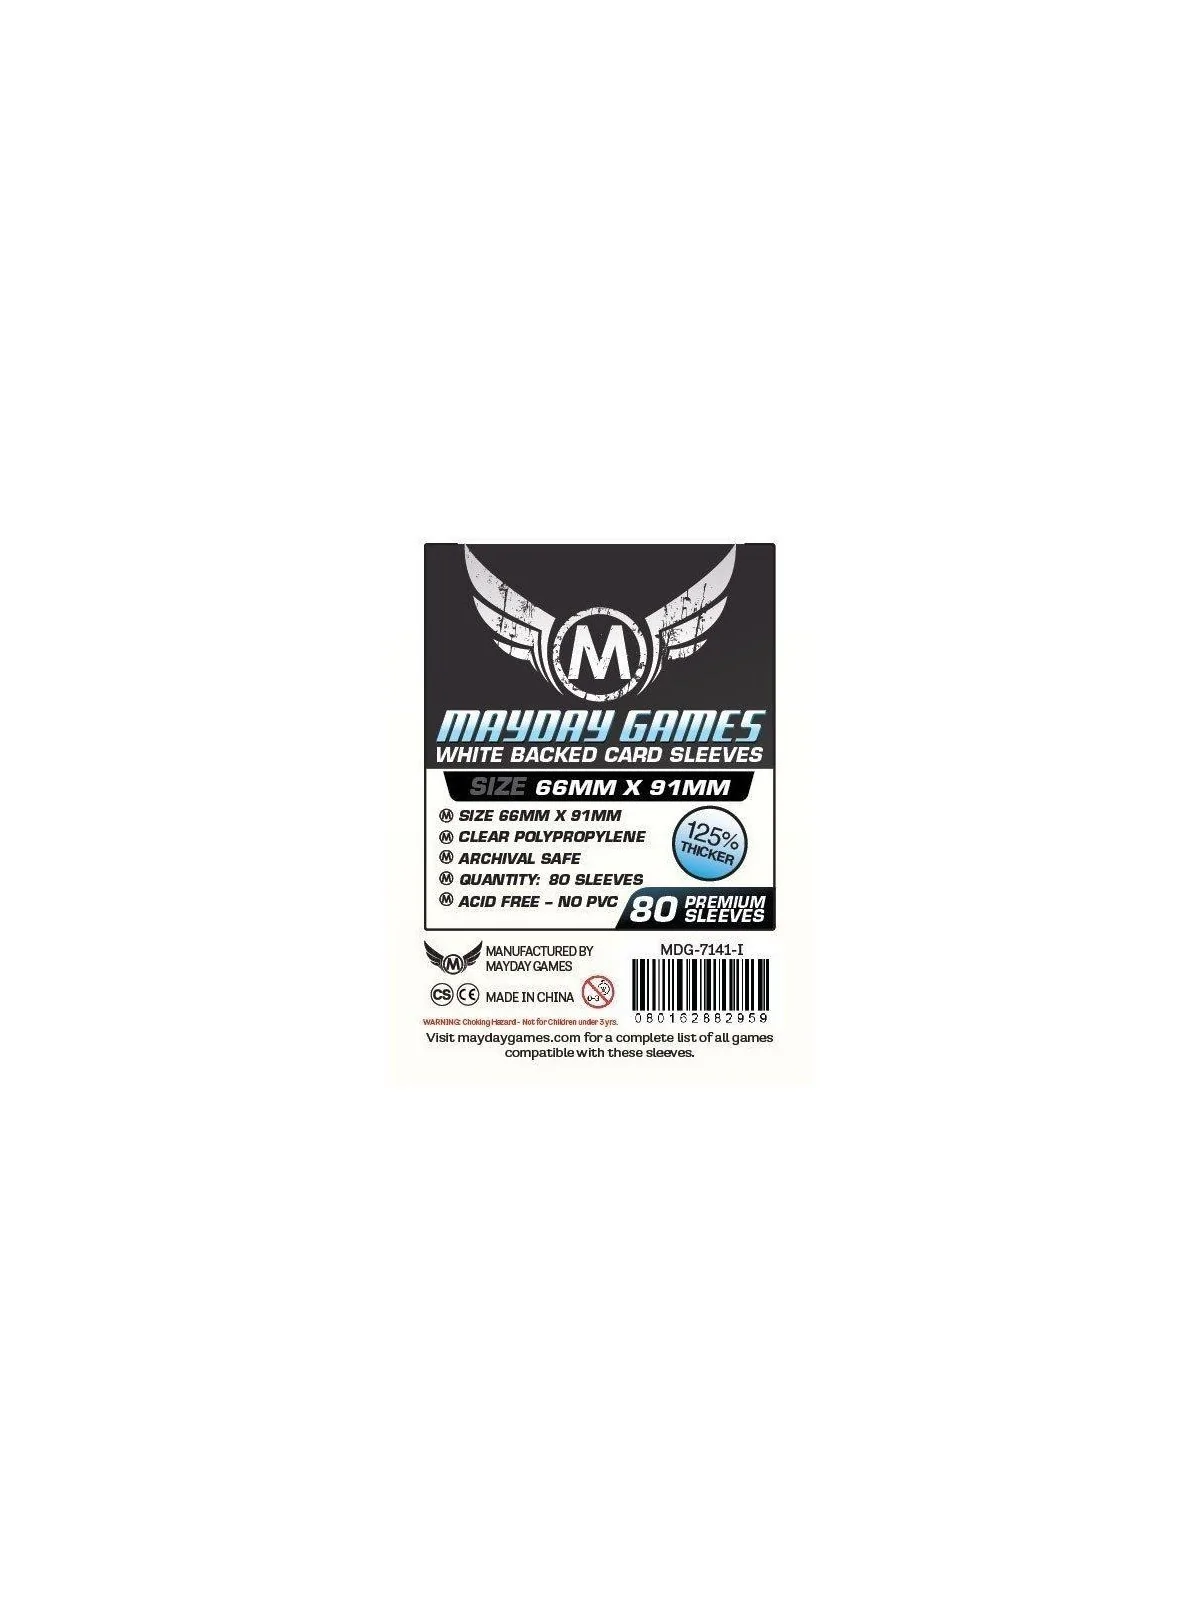 Comprar [7141I] Mayday Games Card Game Sleeves White Backed (Pack of 8